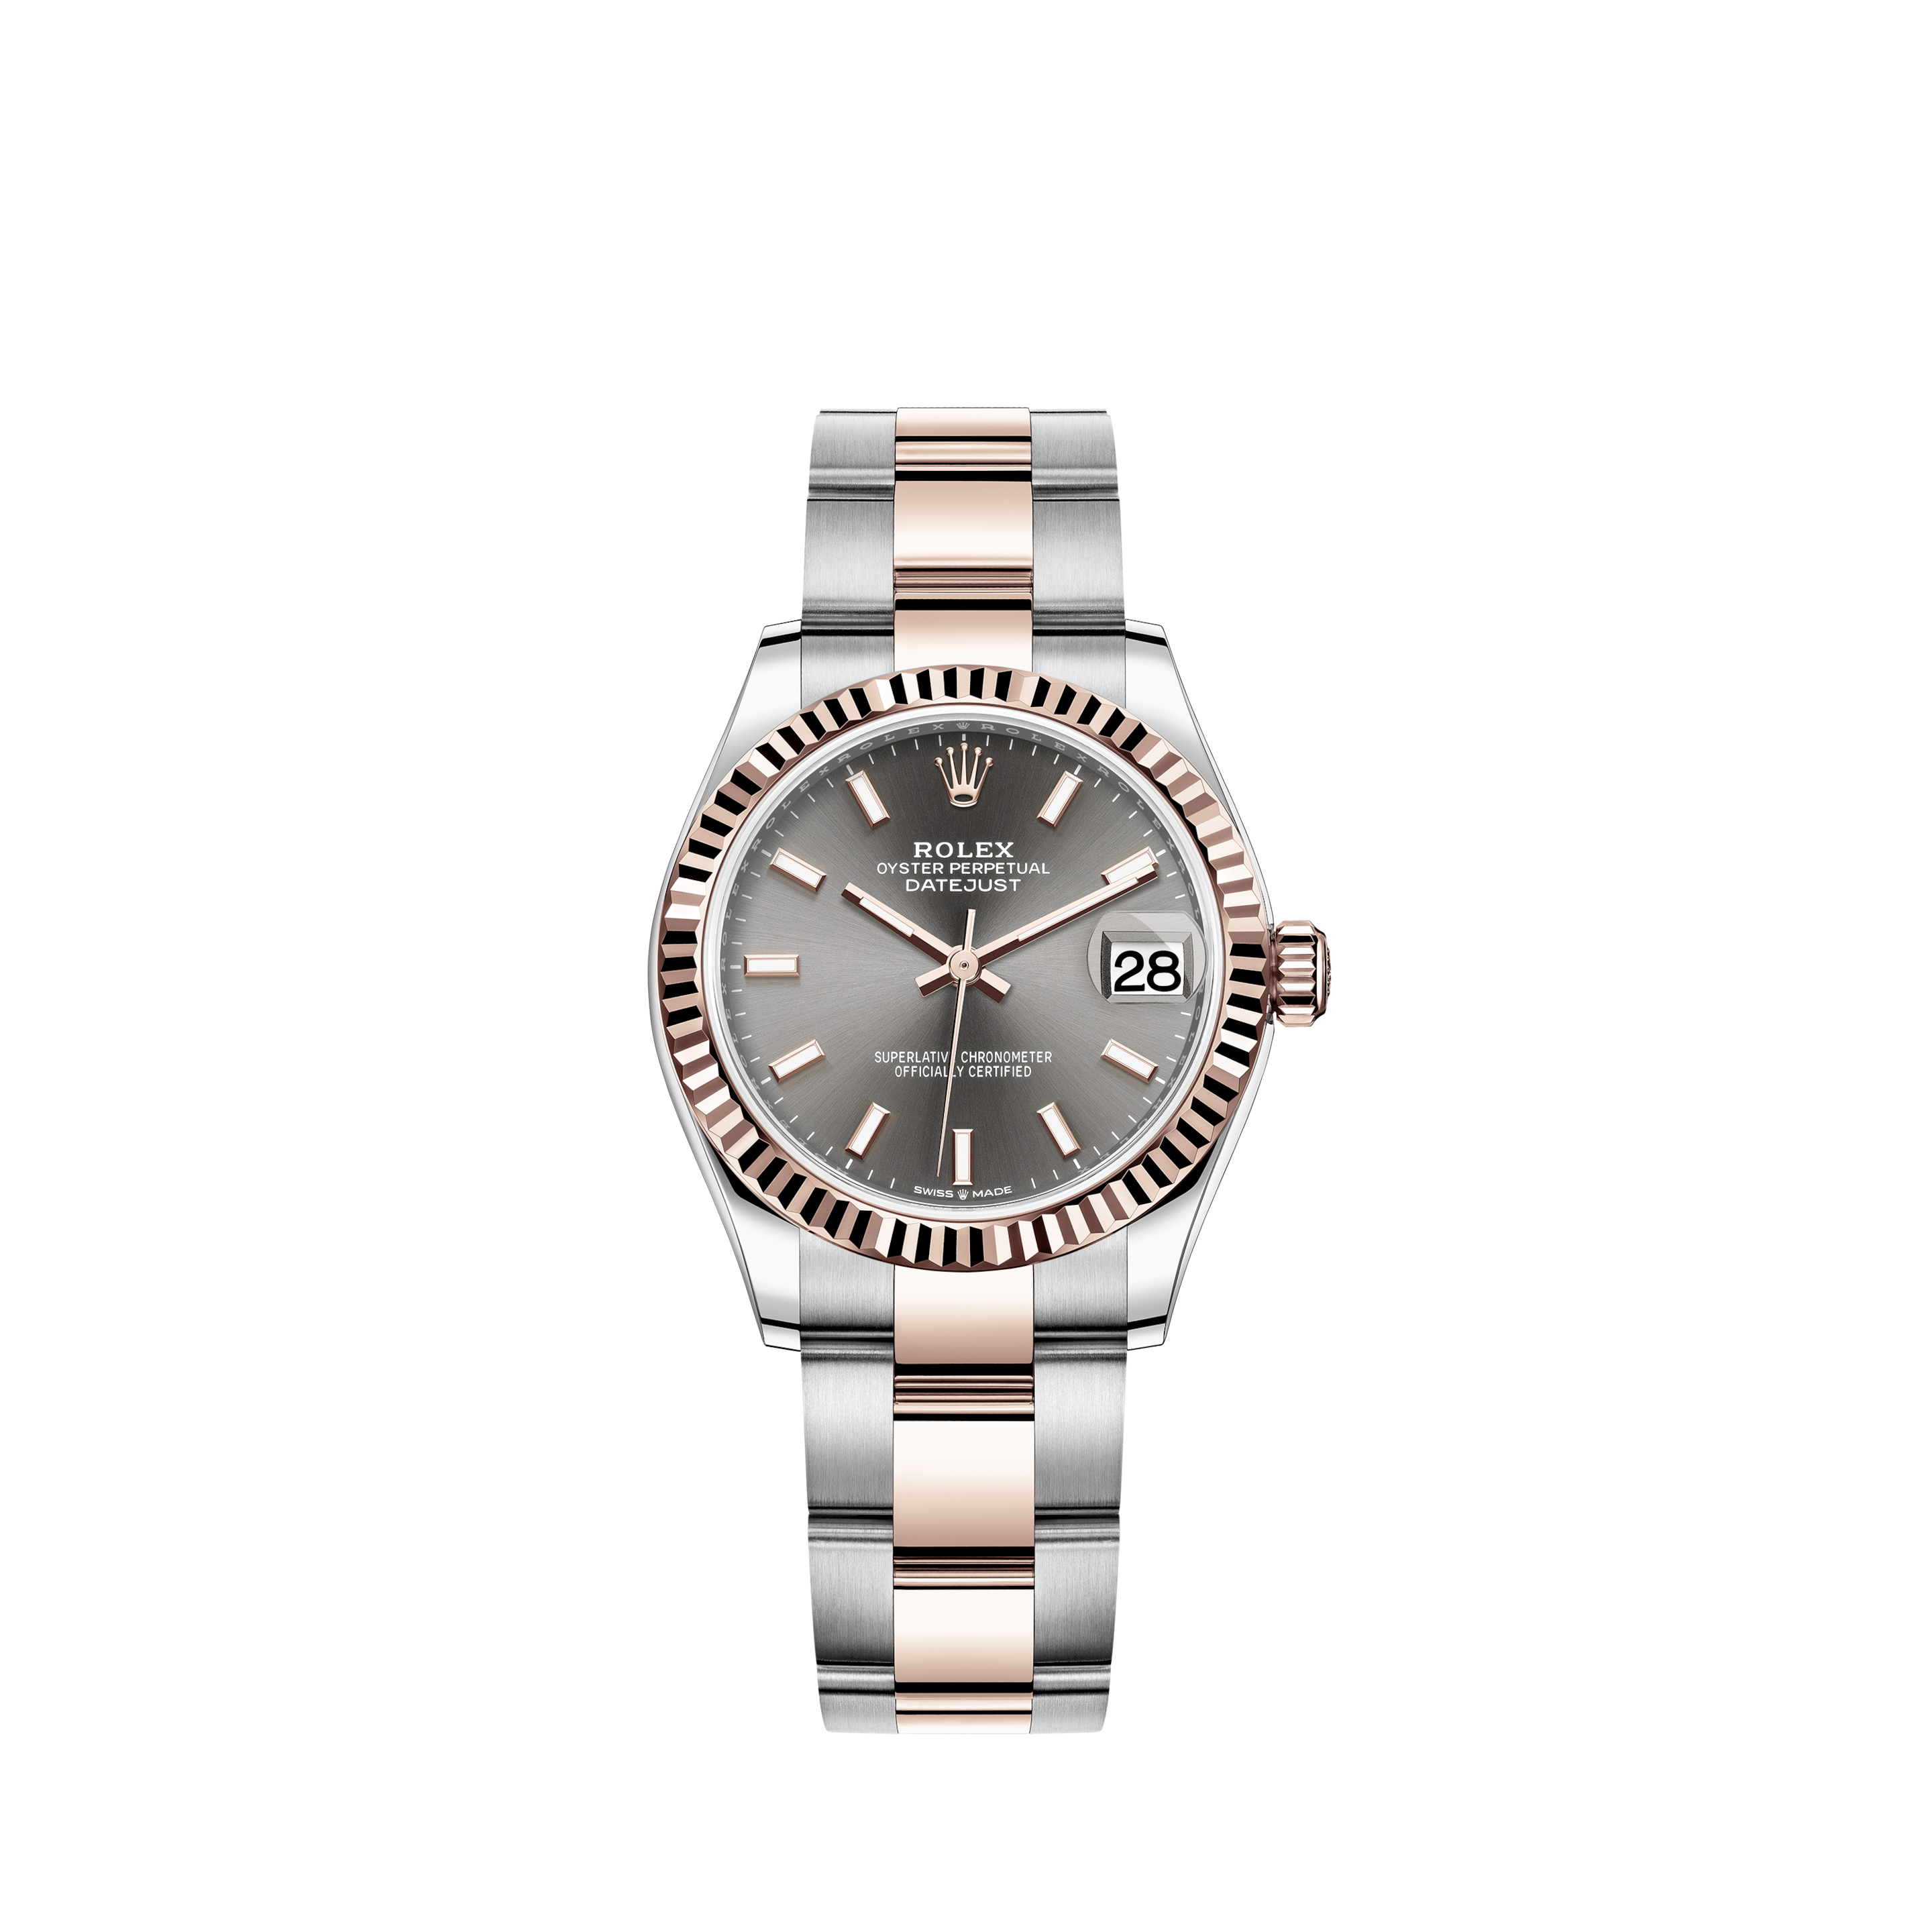 Rolex Datejust 36mm Stainless Steel and Rose Gold 126201 White Index Jubilee